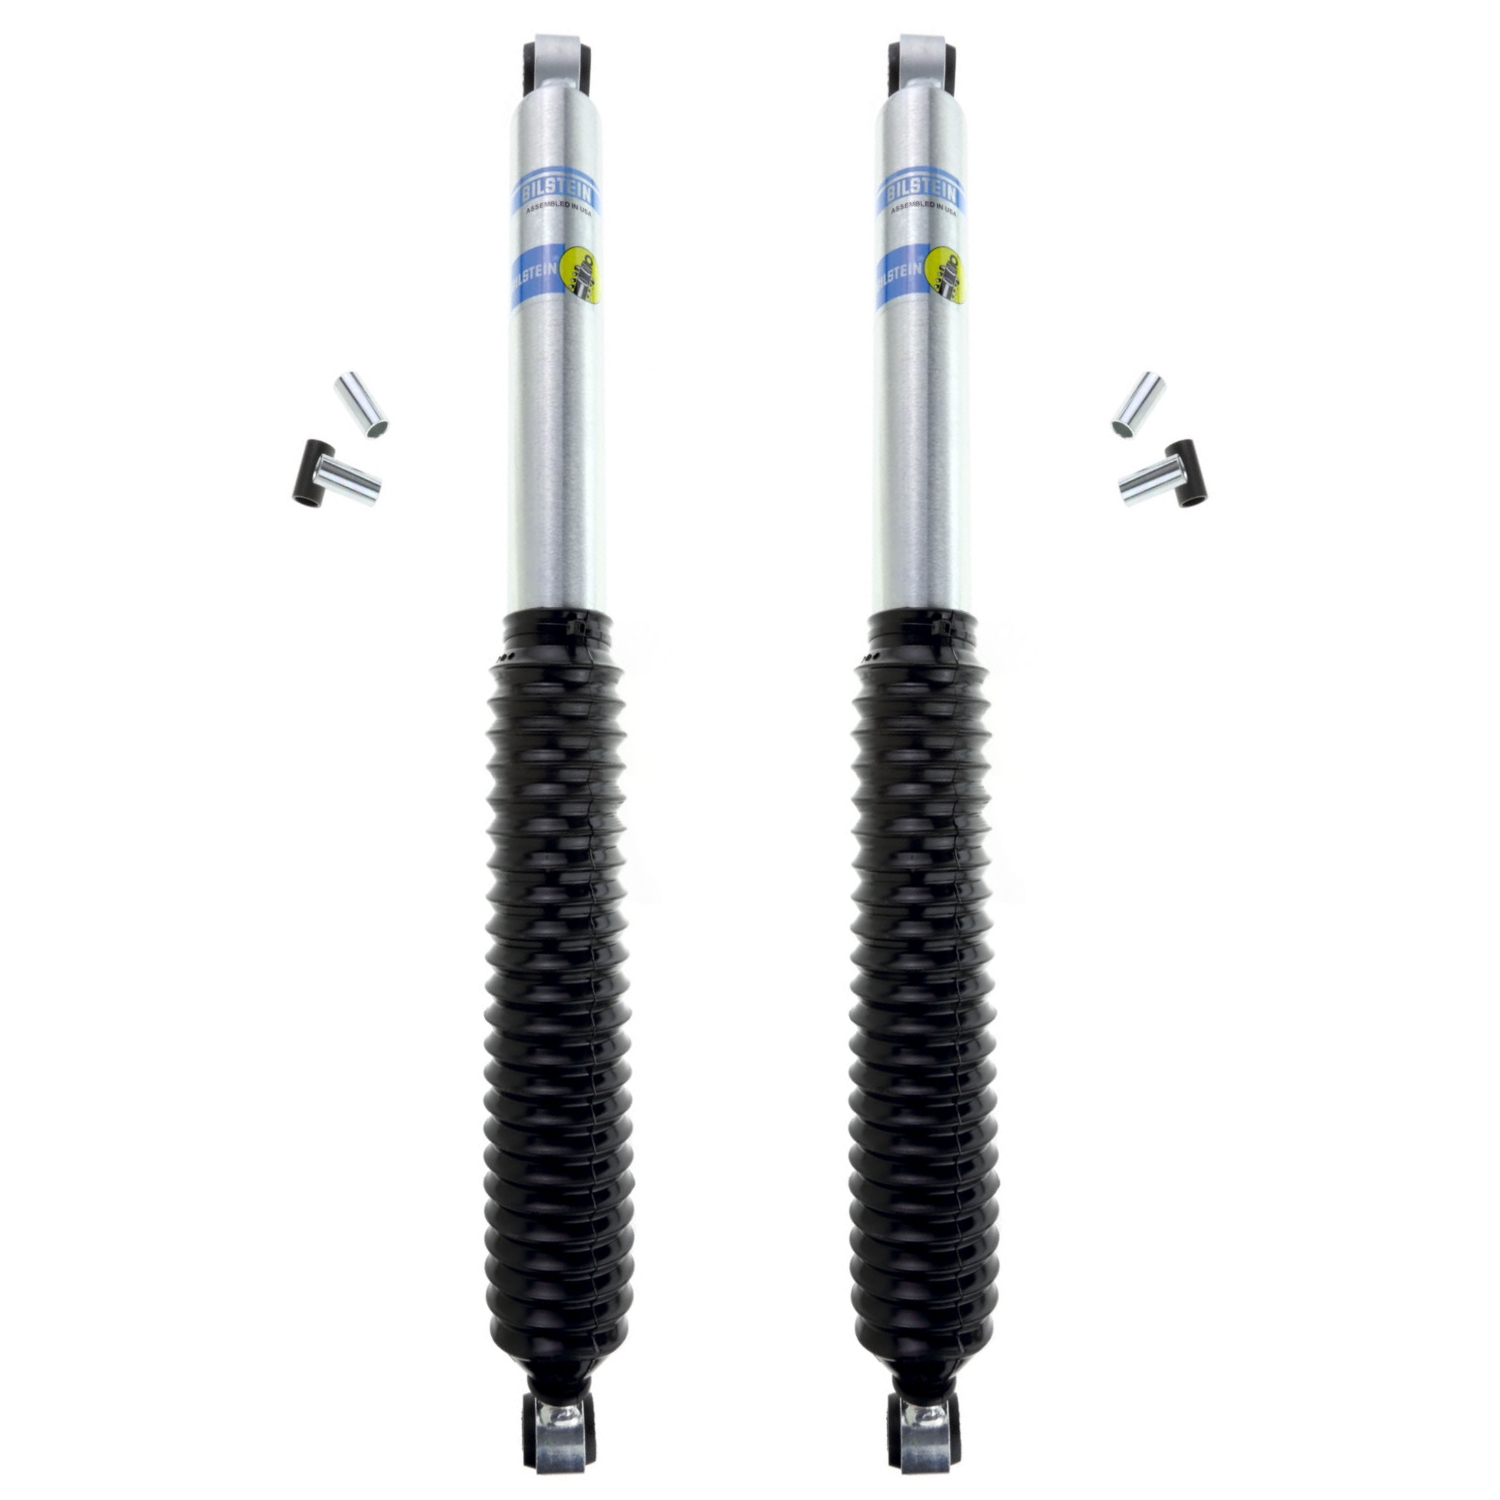 Bilstein B8 5125 Series 2 Rear Shocks Kit for 69-74 Chevy K30 Pickup 6 inch lift Ride Monotube replacement Gas Charged Shock absorbers part number 33-185576 